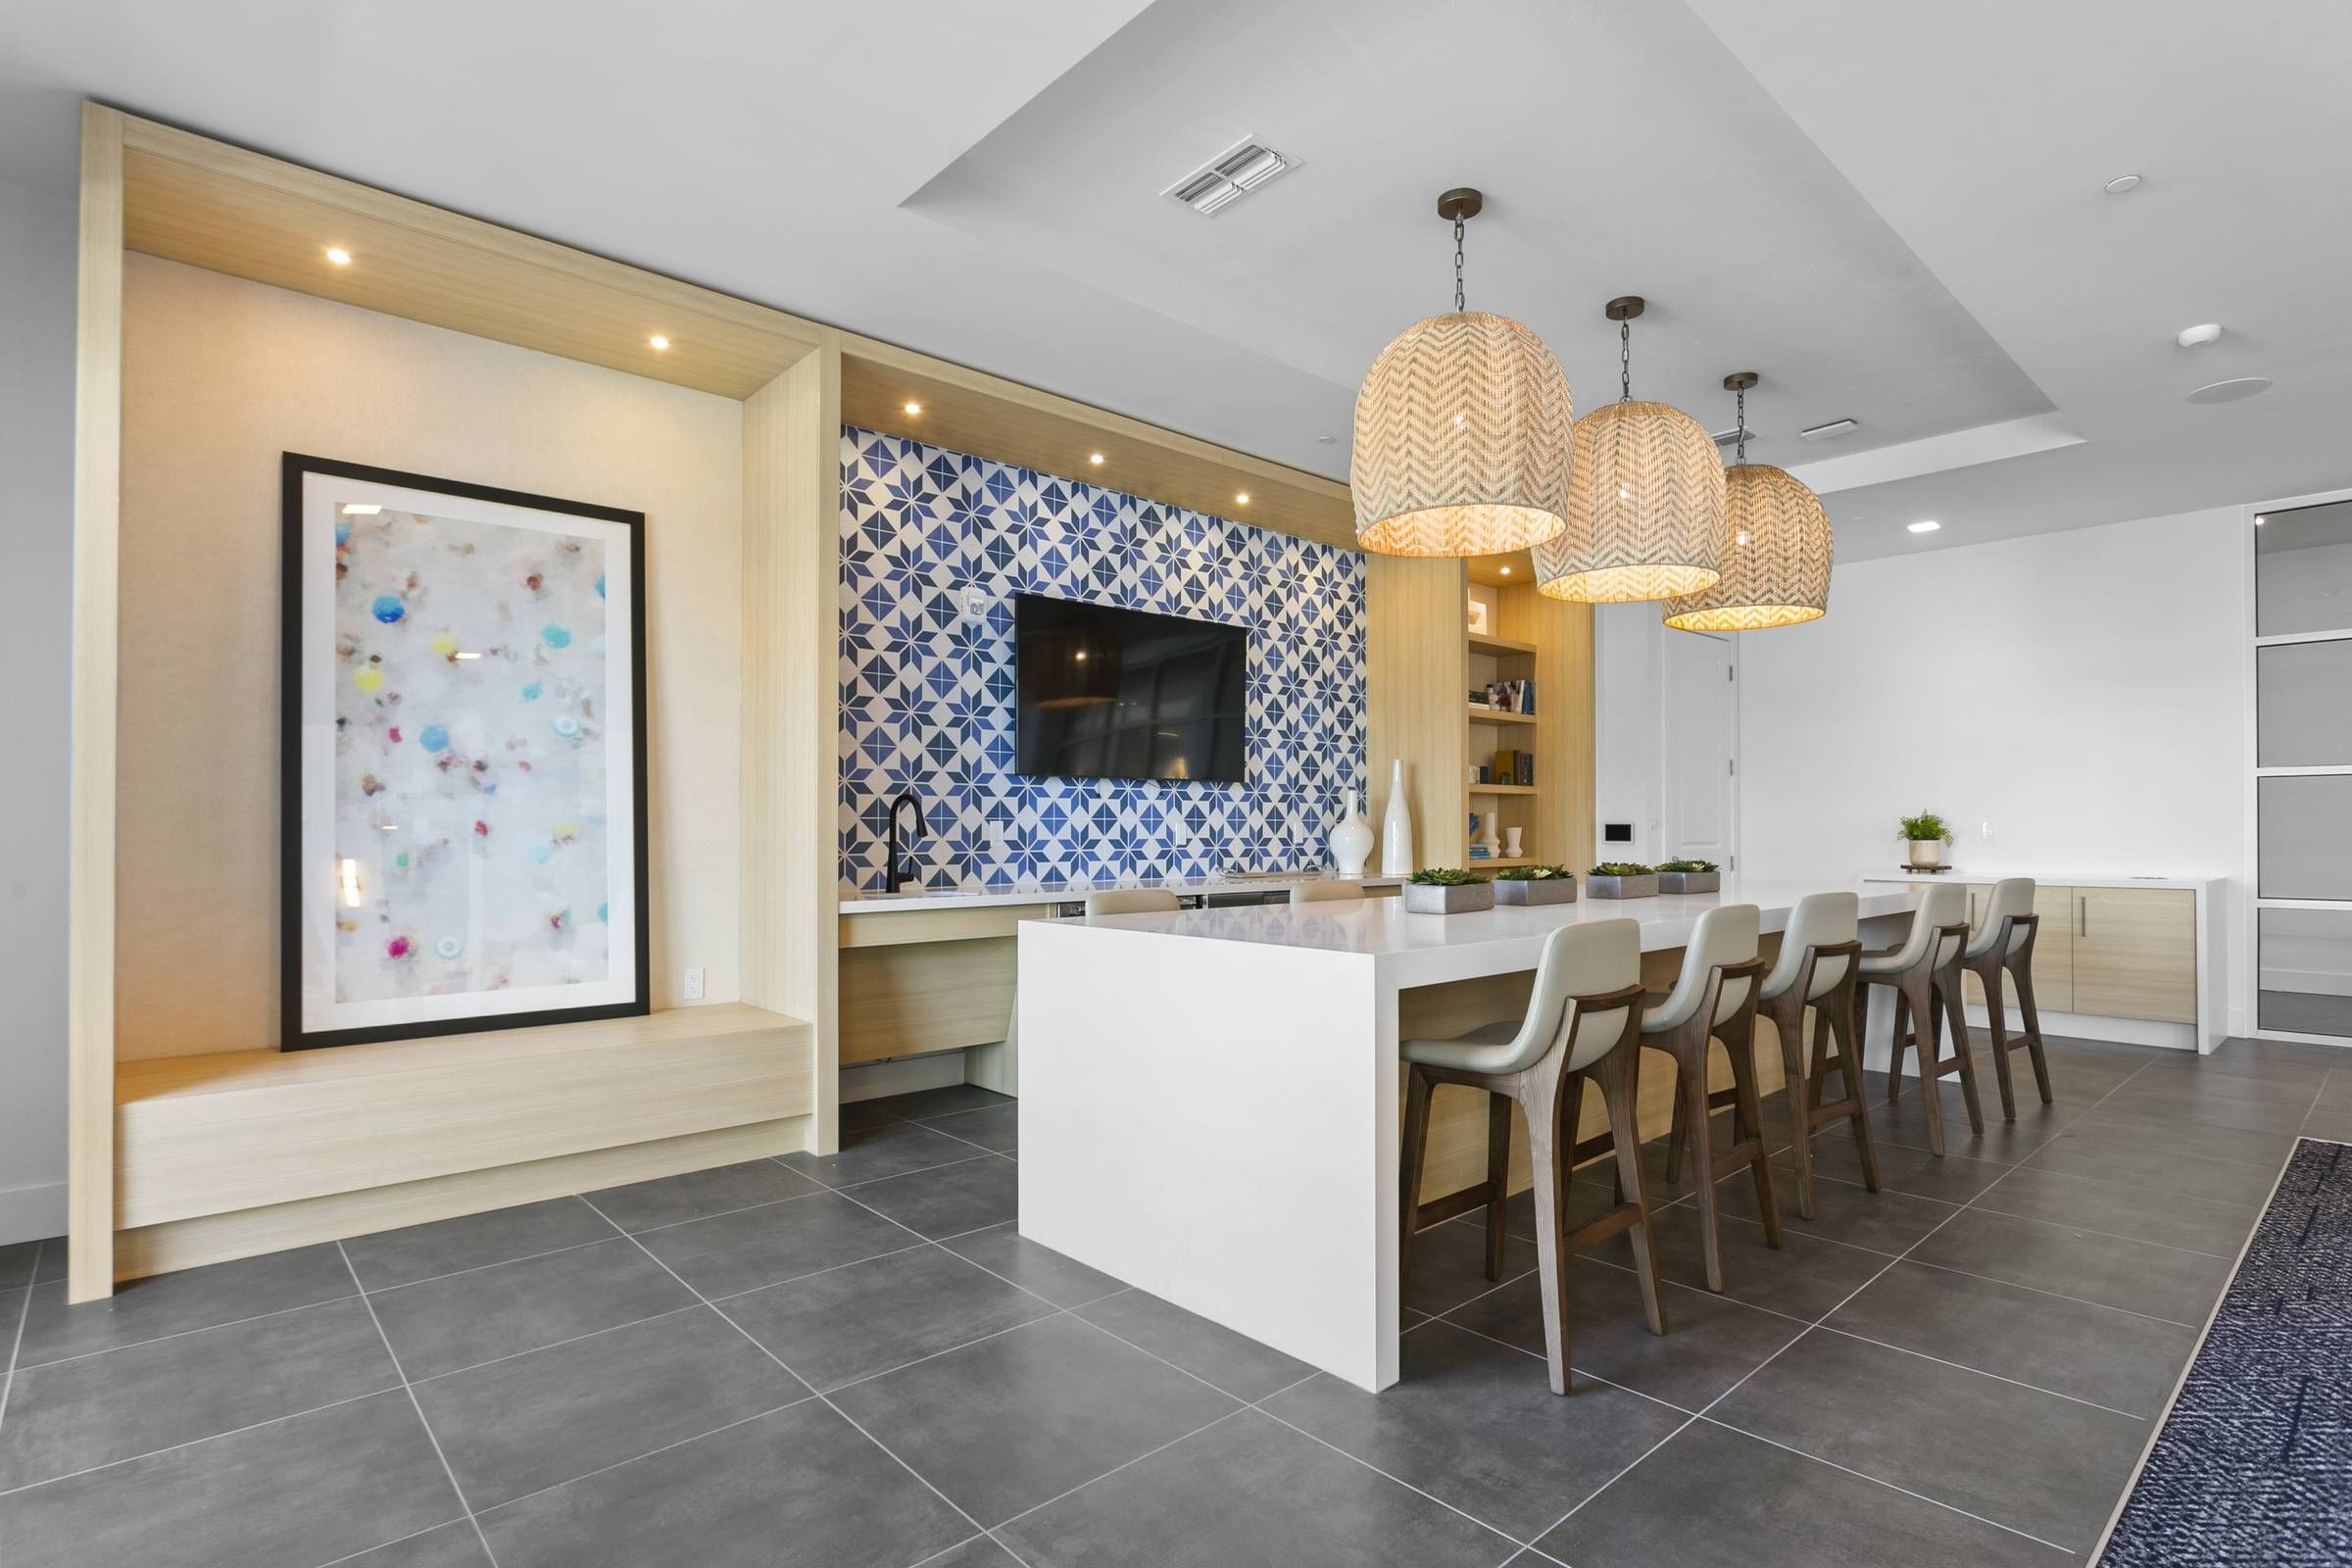 Inside the Alta Belleair clubhouse, a stylish kitchen bar is adorned with unique blue patterned tiles and elegant pendant lights, complemented by a contemporary art piece.